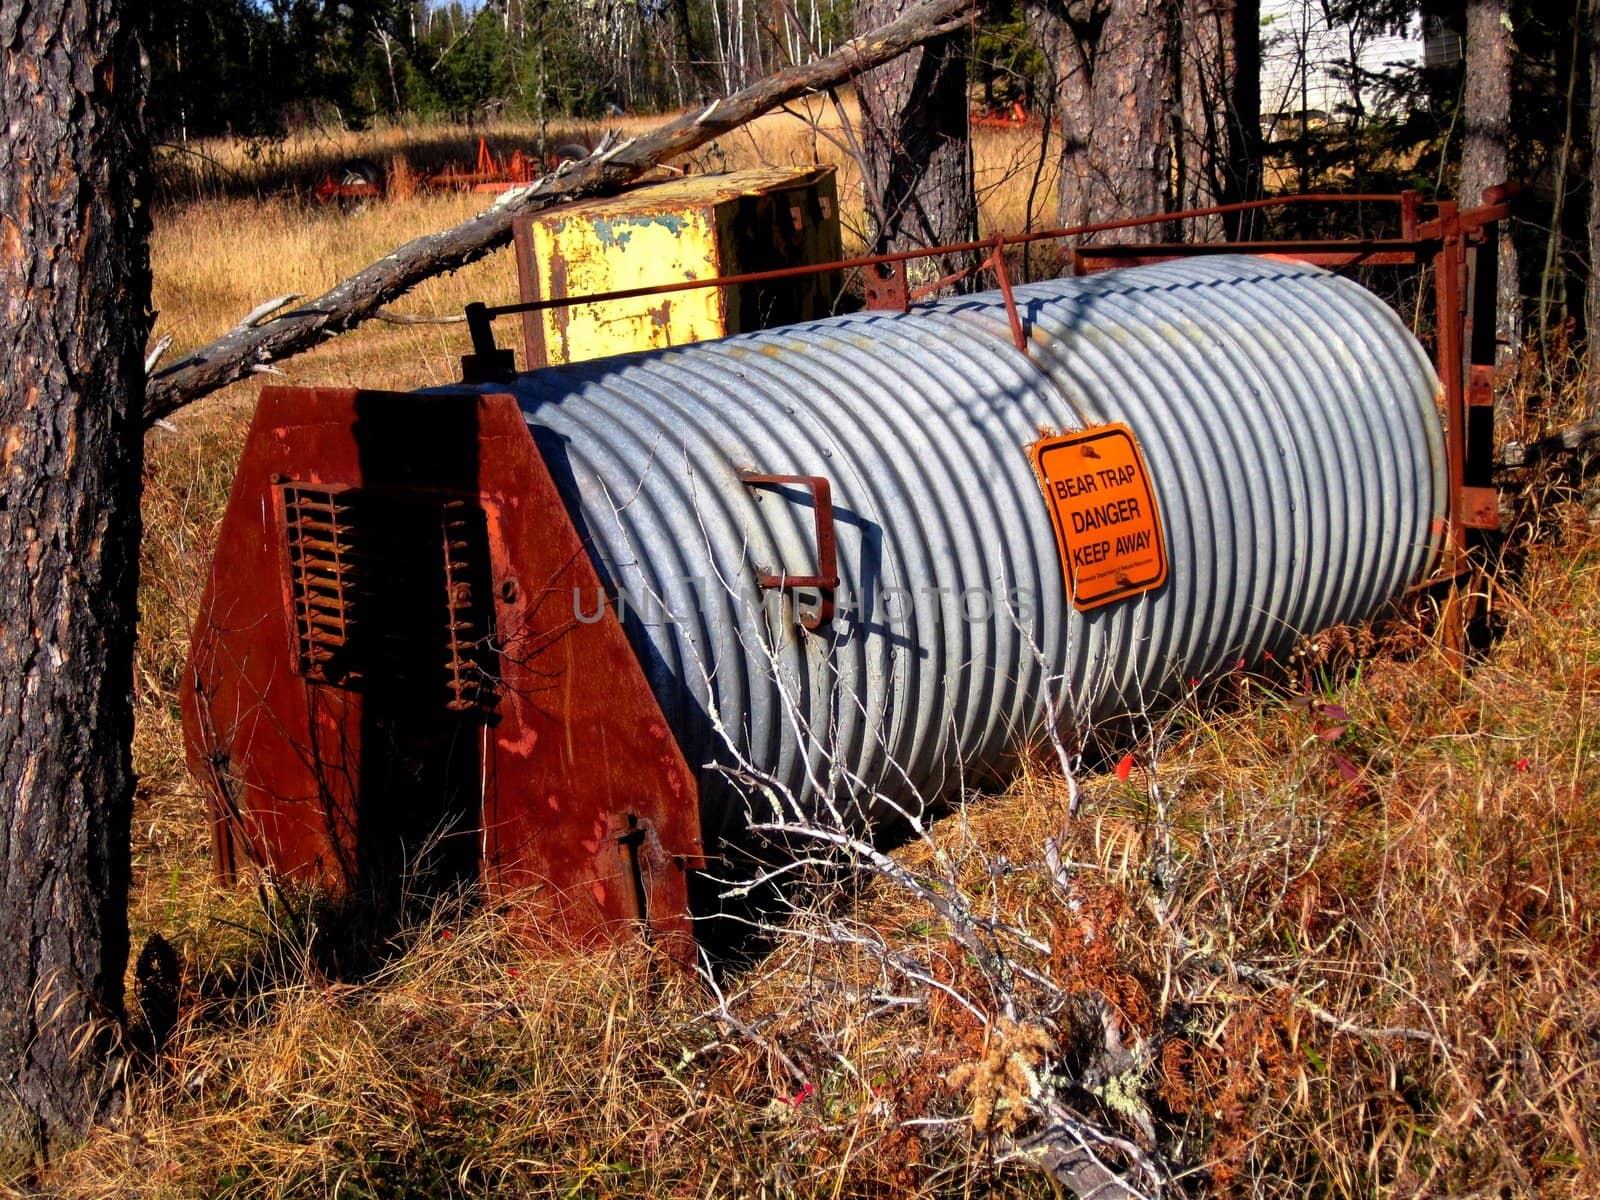 A steel barrel bear trap out in the forest.